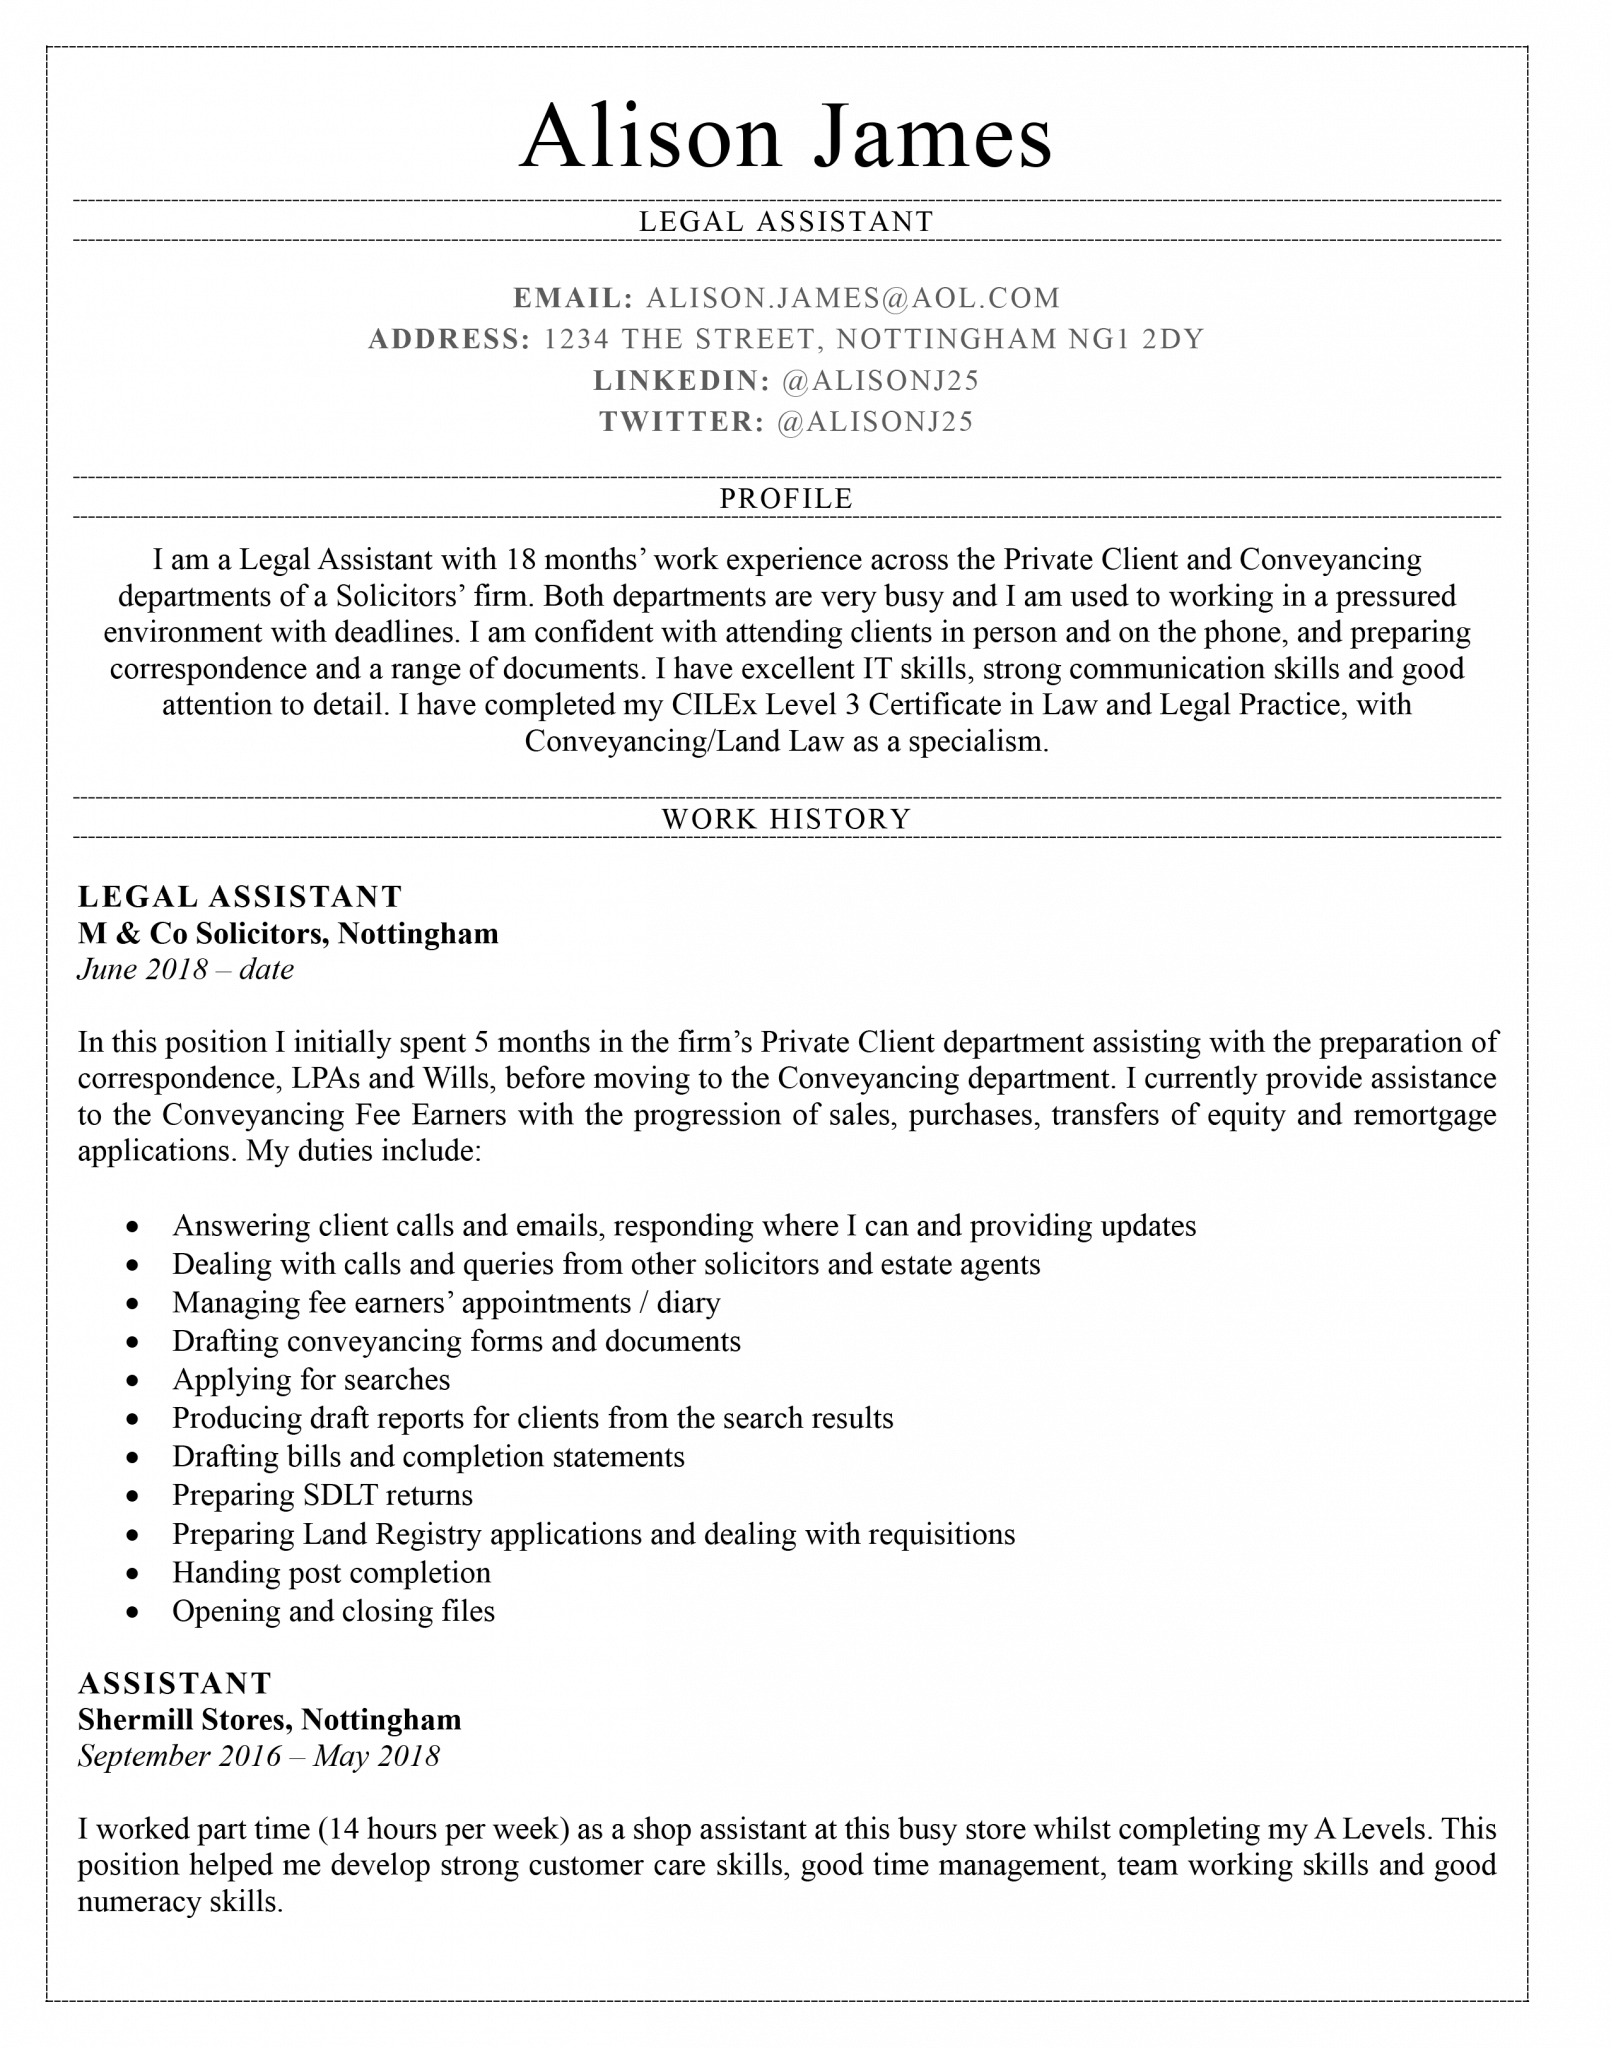 resume help legal assistant